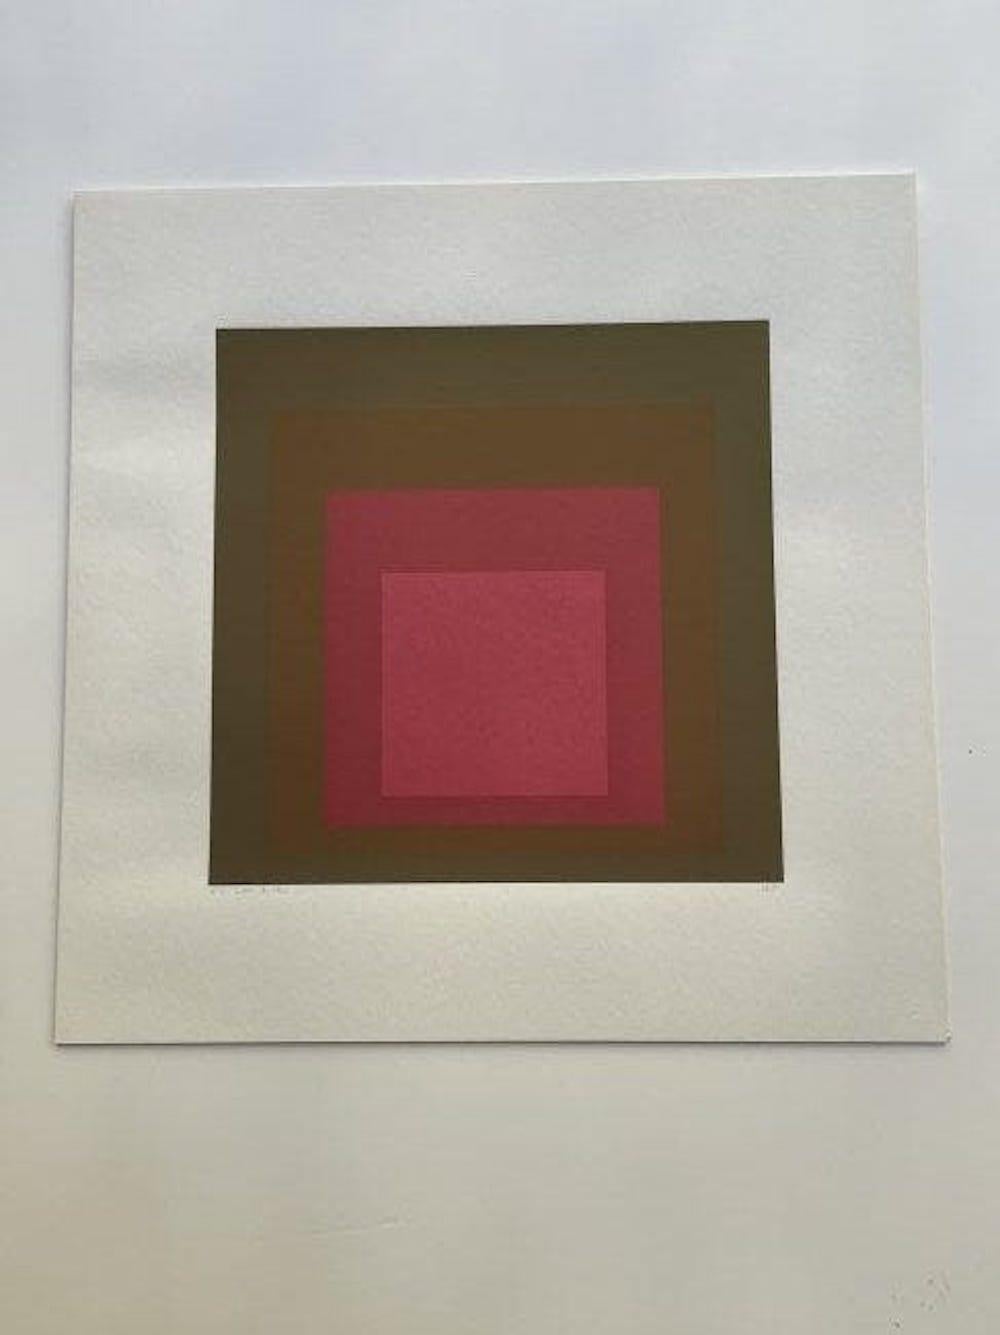 Technical Information:

Josef Albers
I-S LXXI b
1971
Screenprint
23 x 23 in.
Edition of 125
Initialed in pencil, dated, numbered, and titled

Accompanied with COA by Gregg Shienbaum Fine Art

Condition: This work is in excellent condition